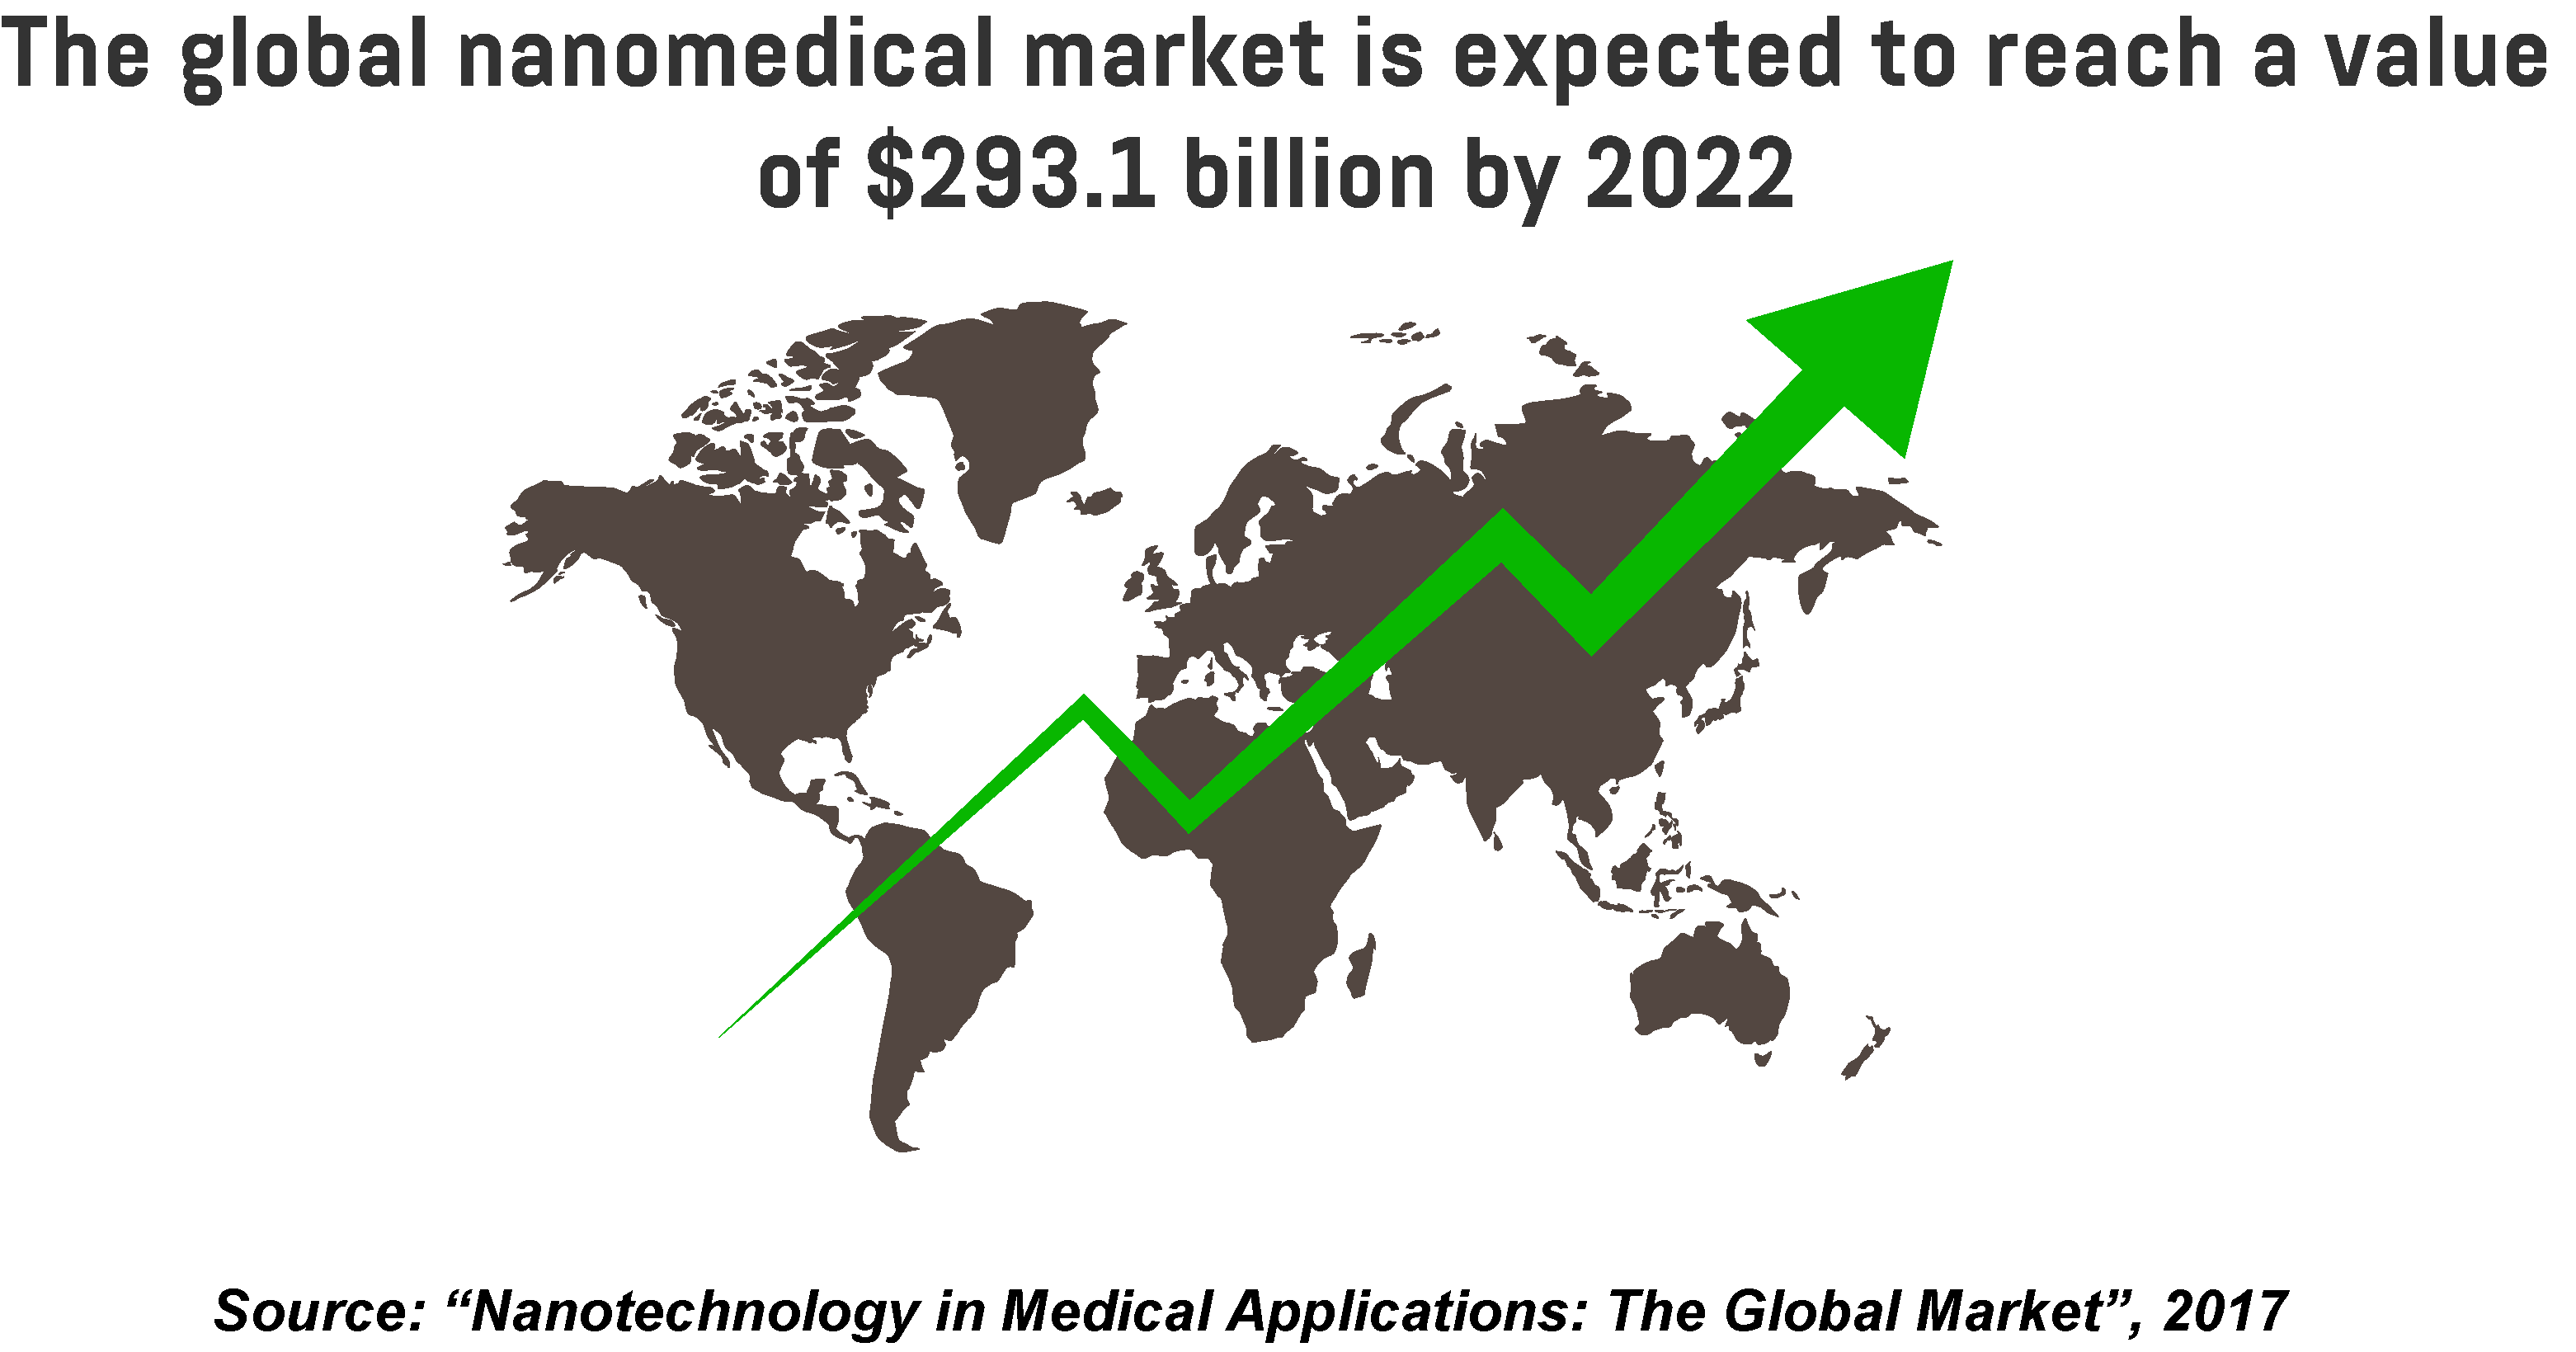  Image showing the predicted growth of the global nanomedical market by 2022.